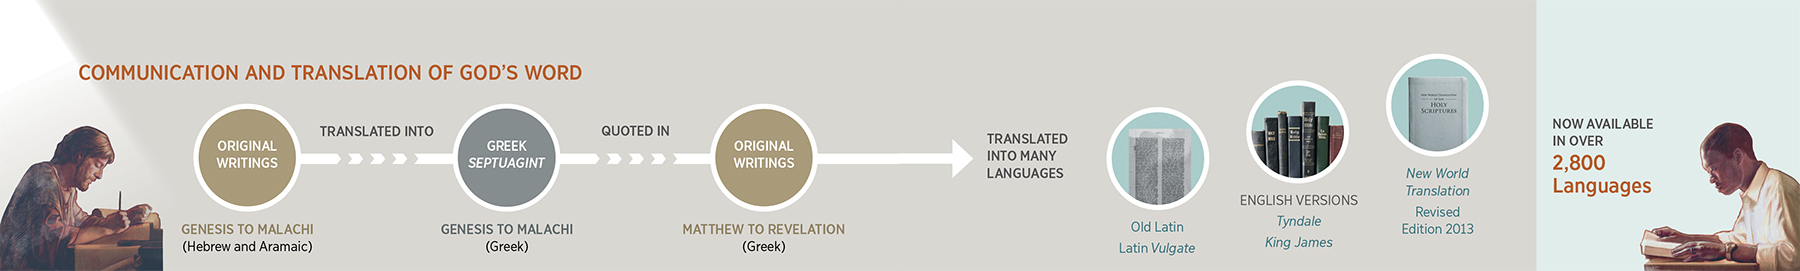 The translation of God’s Word from its original writings until the revised New World Translation in 2013